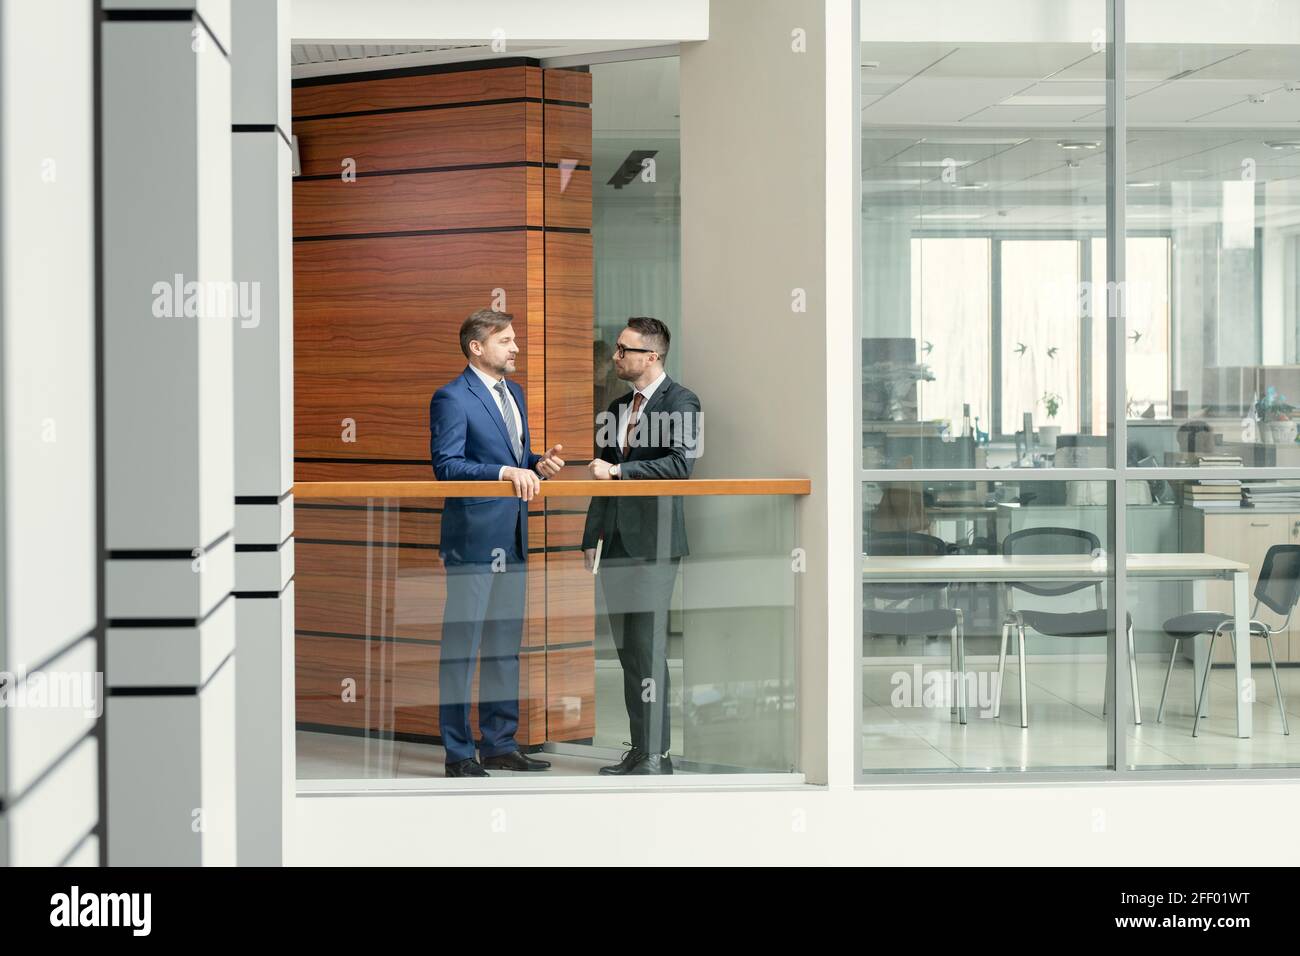 Mature businessman standing at railing and talking to young colleague in corridor Stock Photo